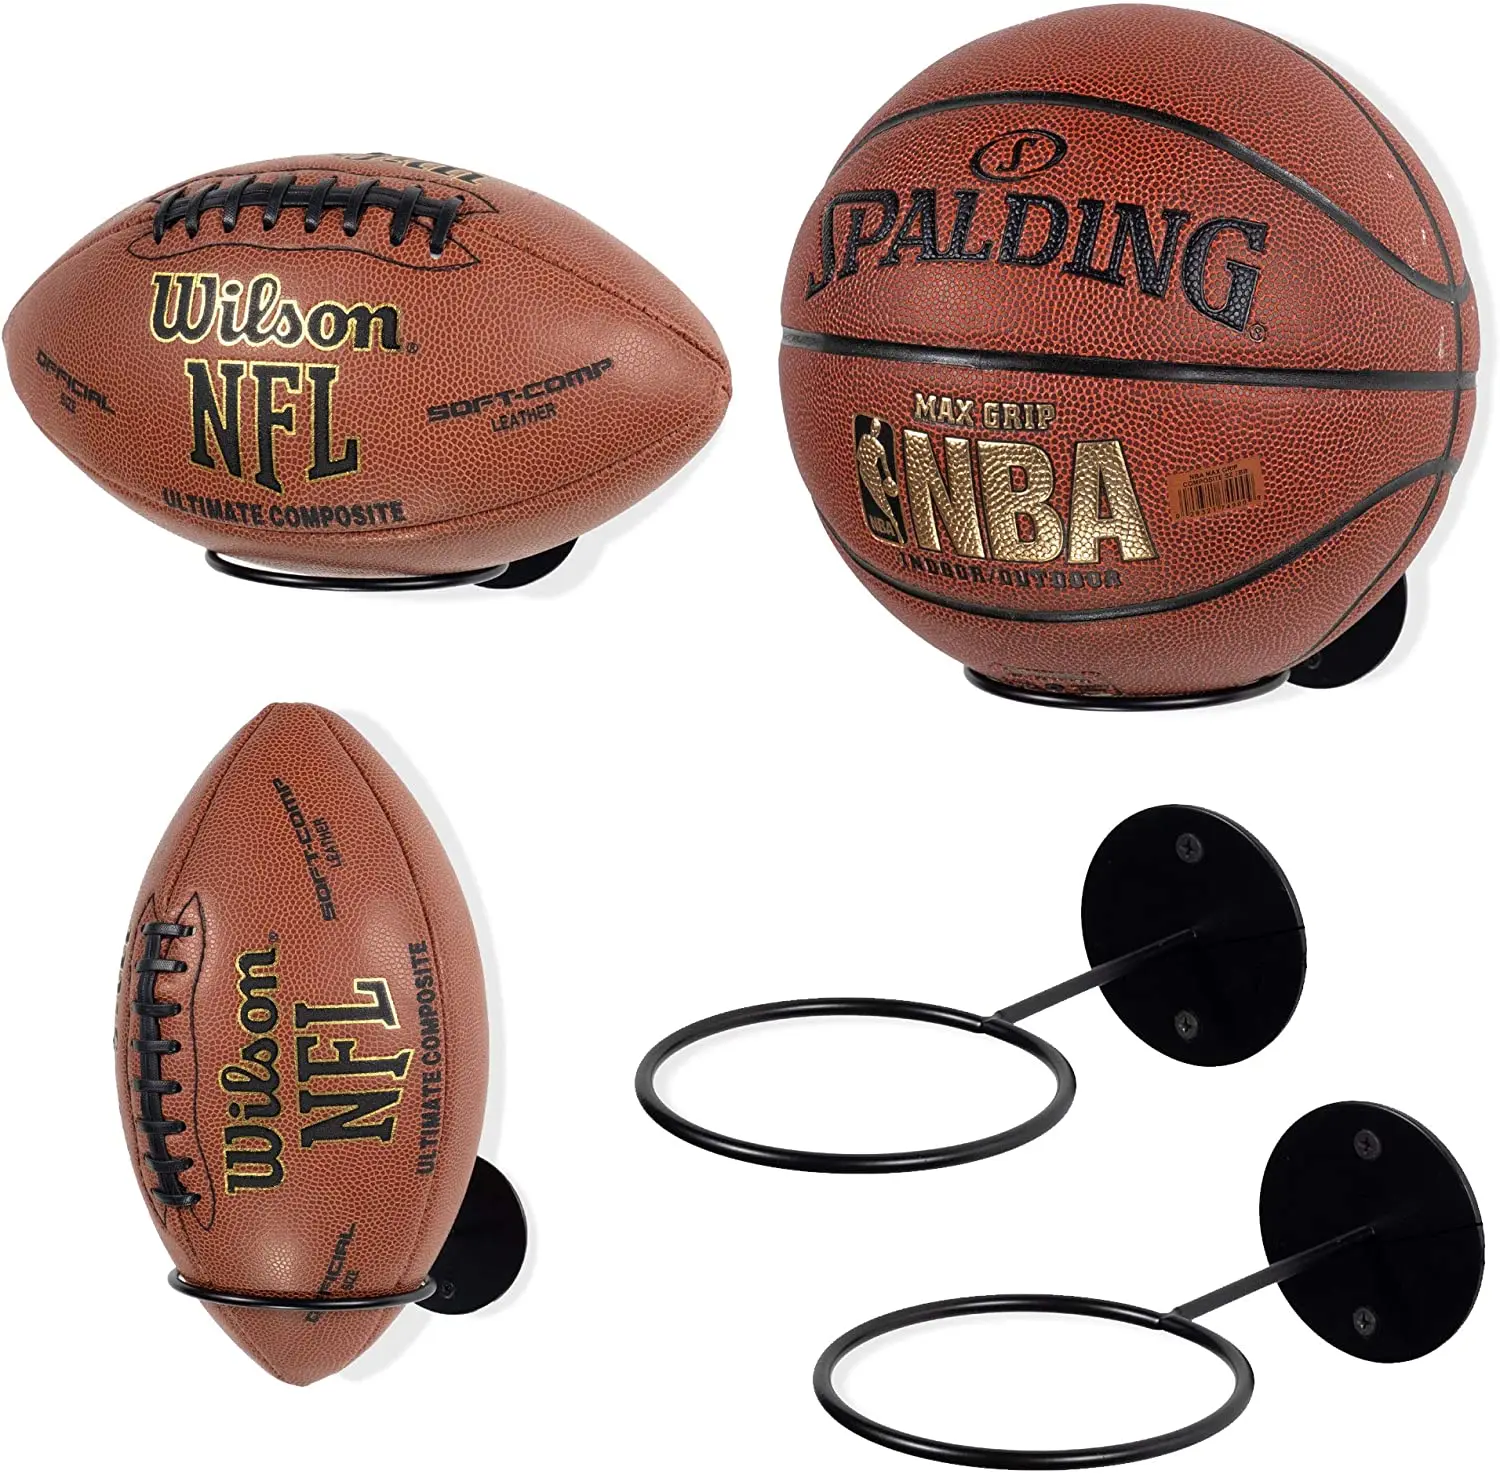 Whewer Wall Mount Football Holder Ball Rack Storage Steel Display Stand Sports Ball Holder sliever 